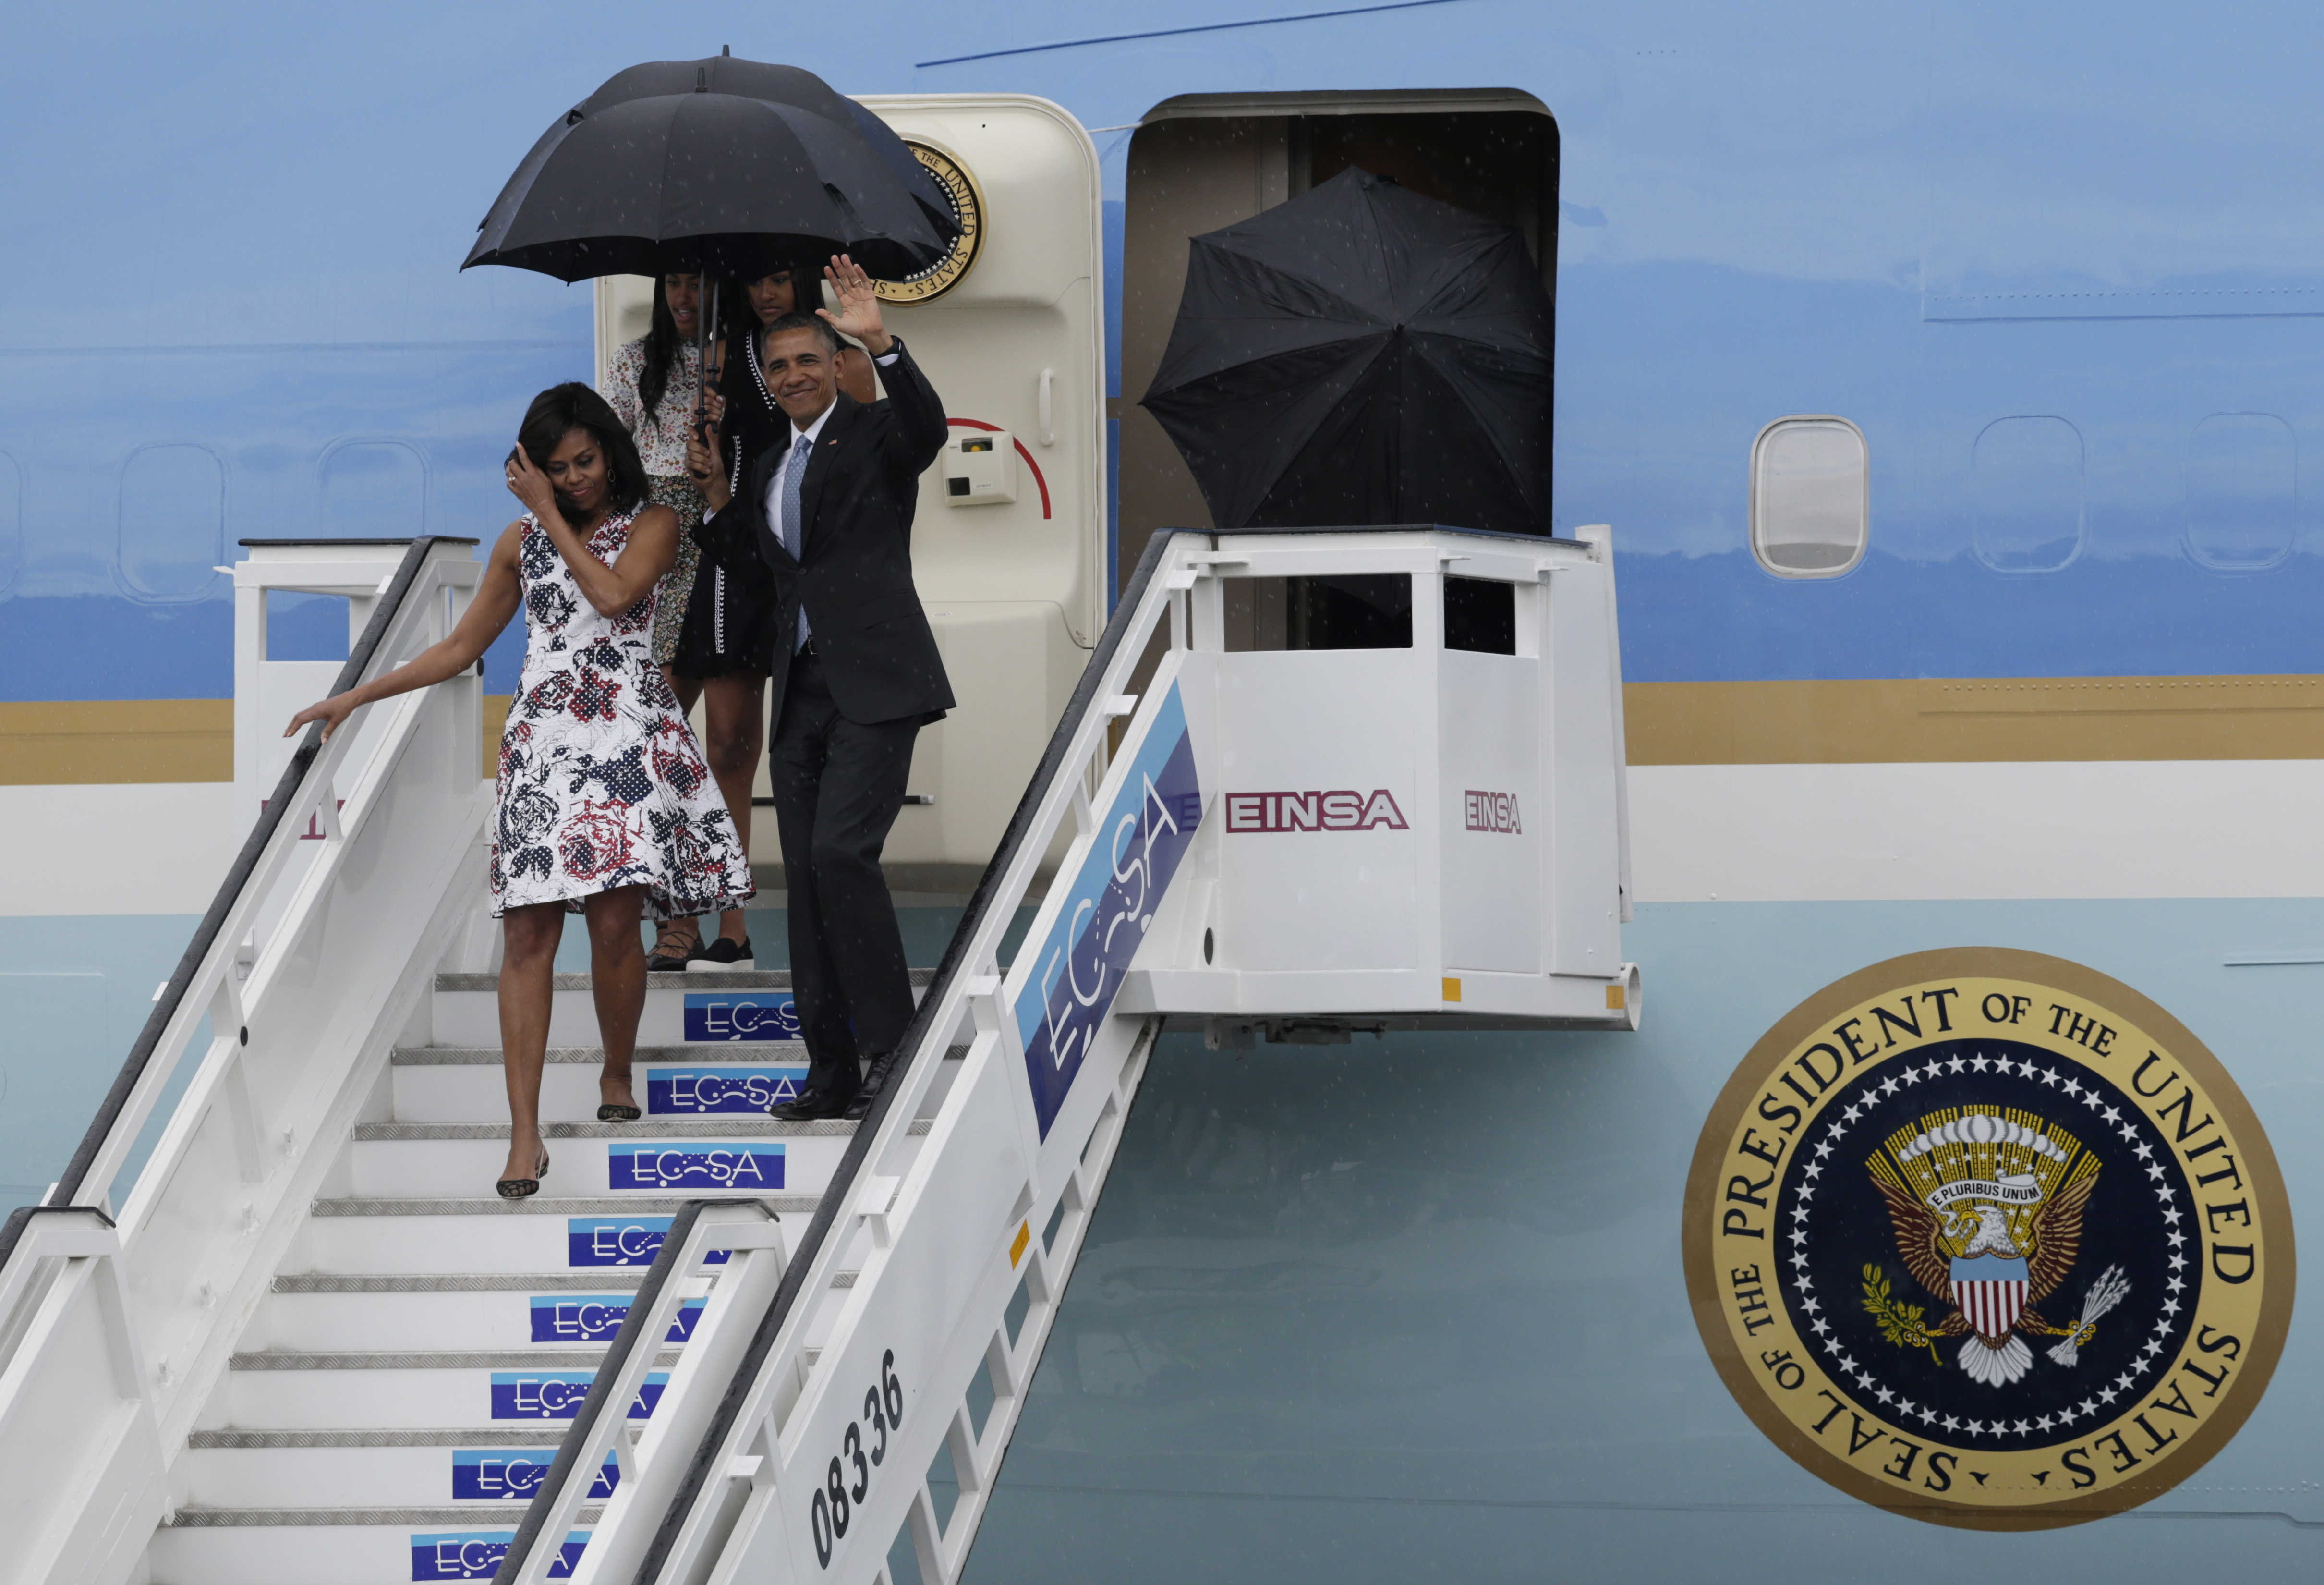 U.S. President Barack Obama, his wife Michelle, and their daughters Malia and Sasha, exit Air Force One as they arrive at Havana's international airport for a three-day trip, in Havana March 20, 2016.  REUTERS/Enrique De La Osa  - RTSBDKY